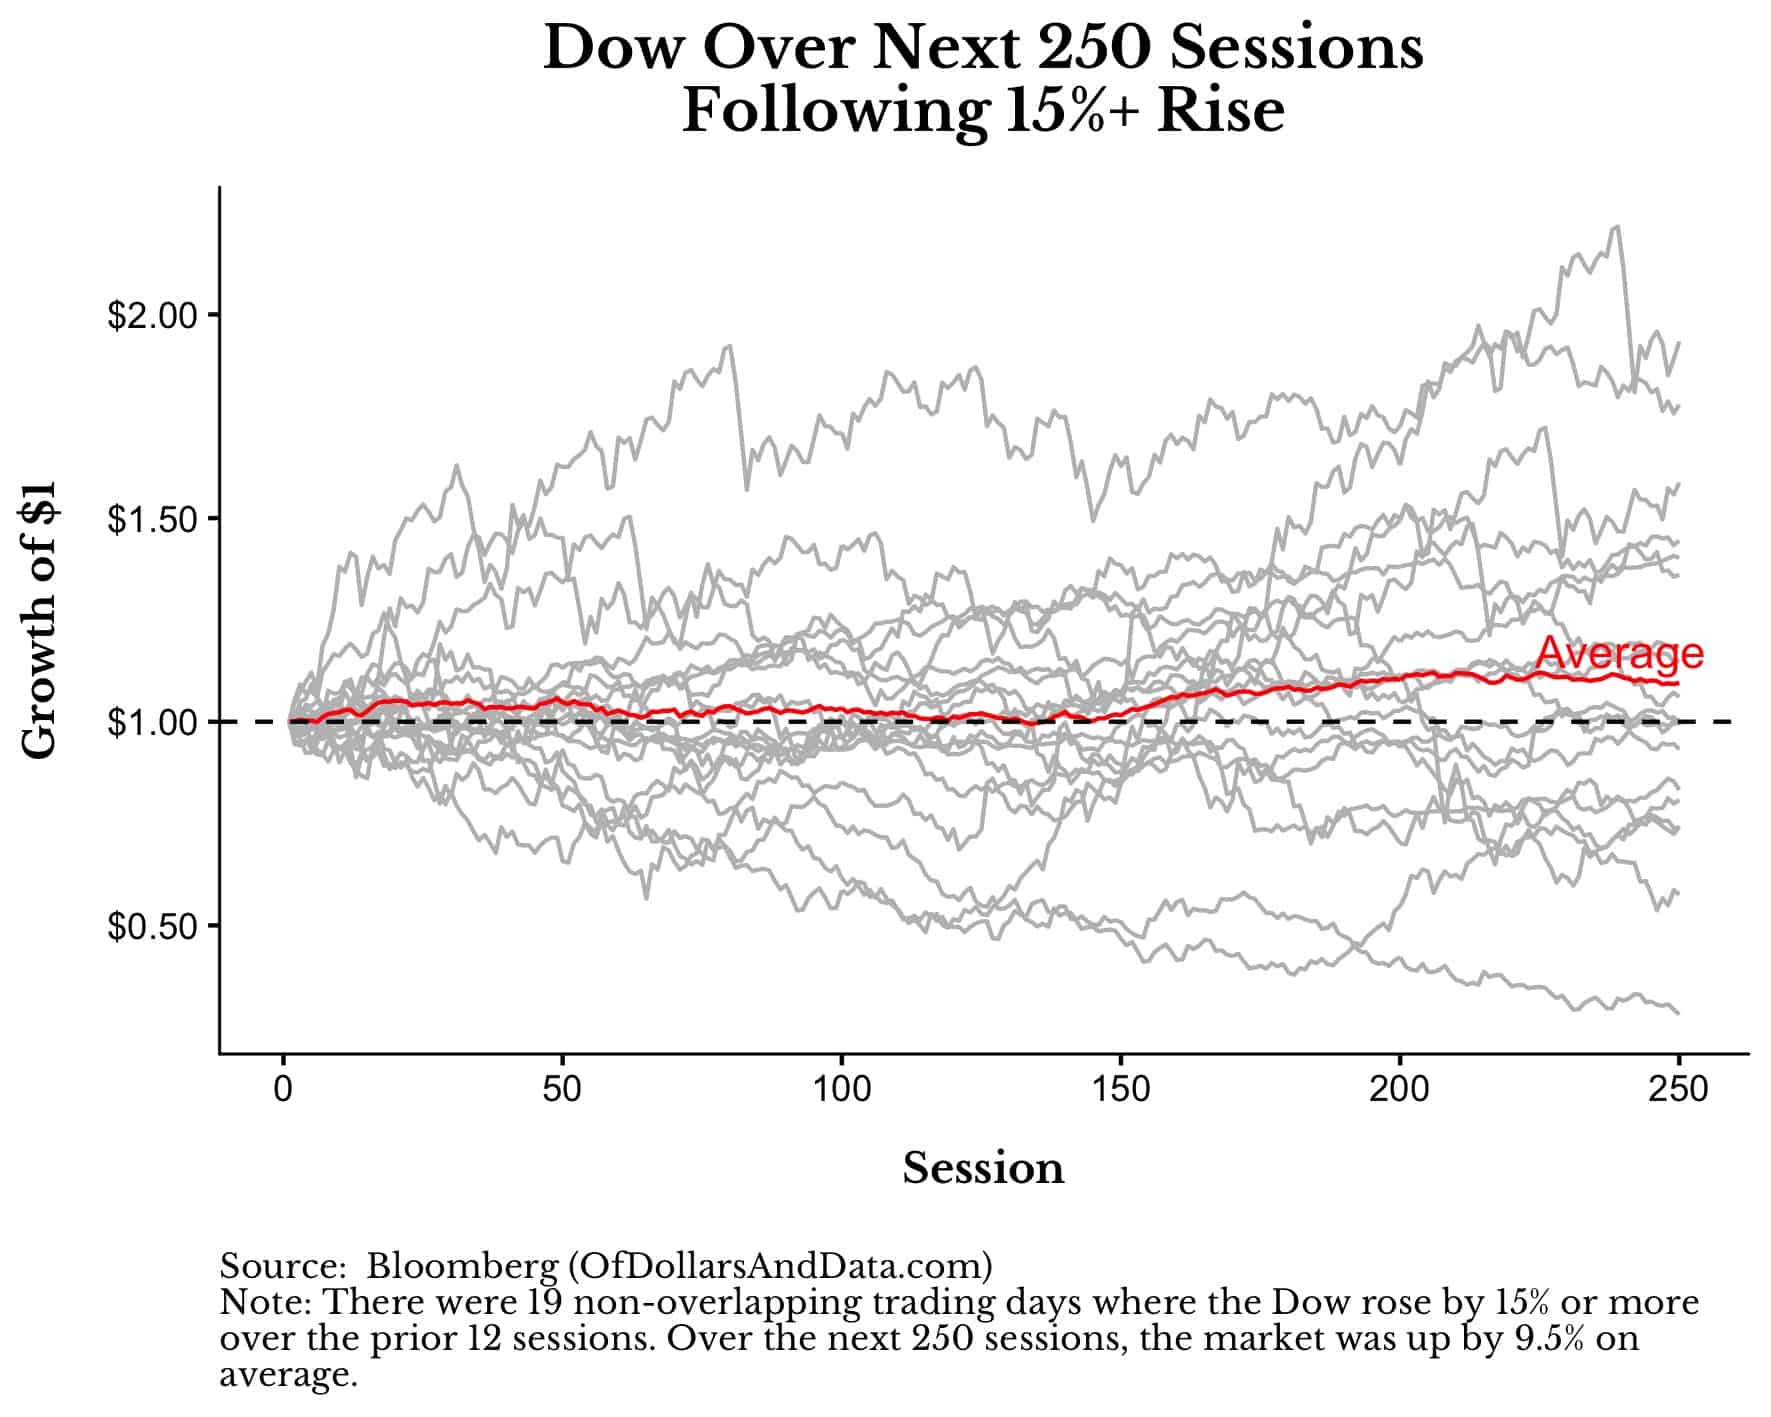 Dow over next 250 sessions following a 15% or greater increase in prices